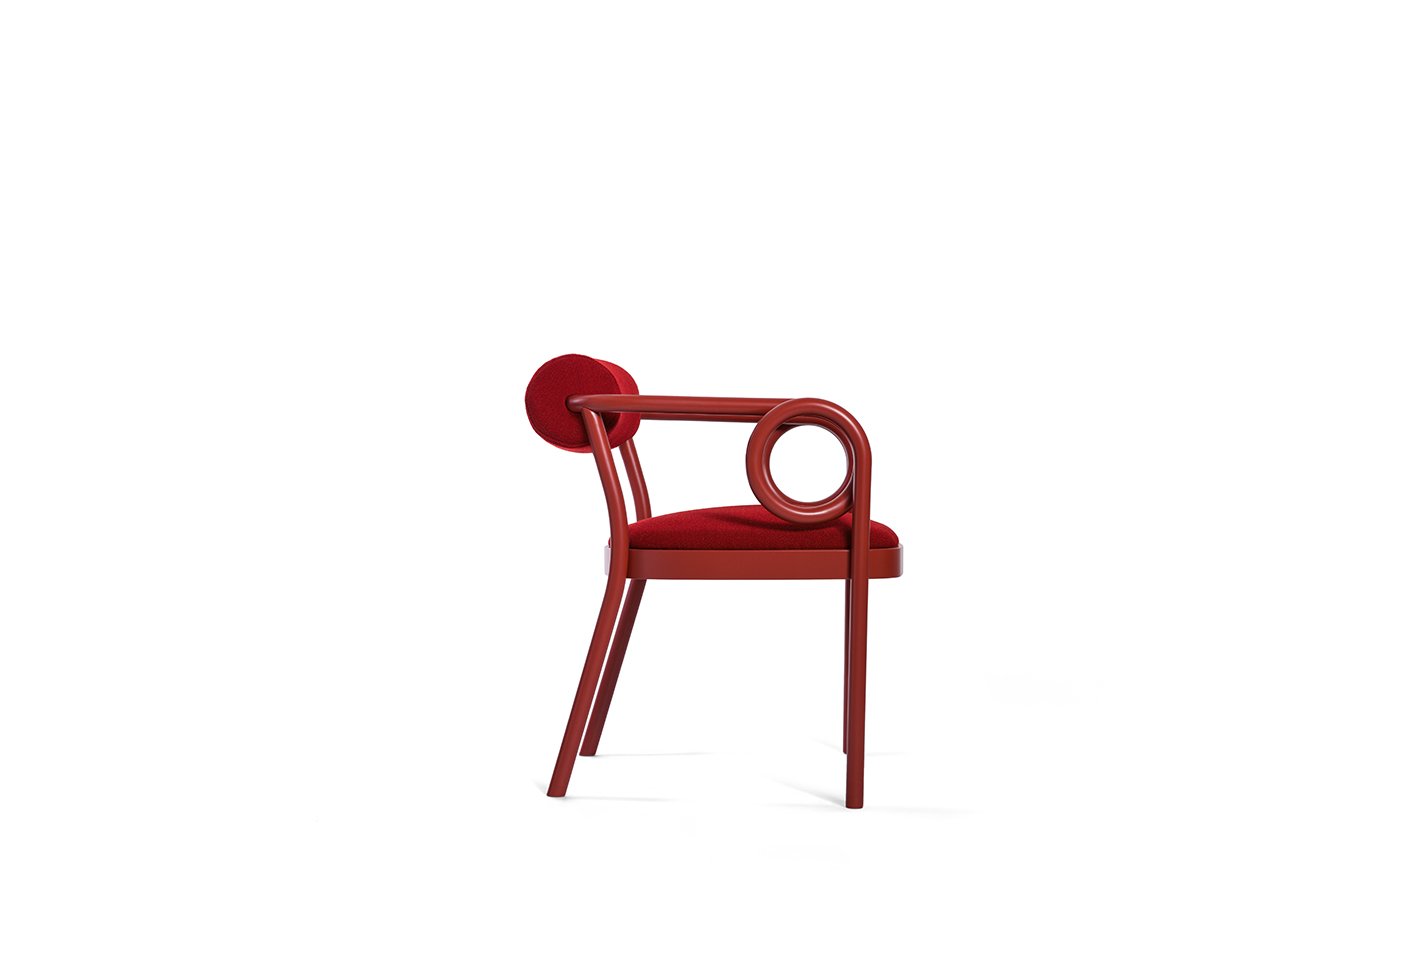 Distinctive for its colour and form, the Loop chair was designed by French architect India Mahdavi for Gebrüder Thonet Vienna. Photo c/o Gebrüder Thonet Vienna.